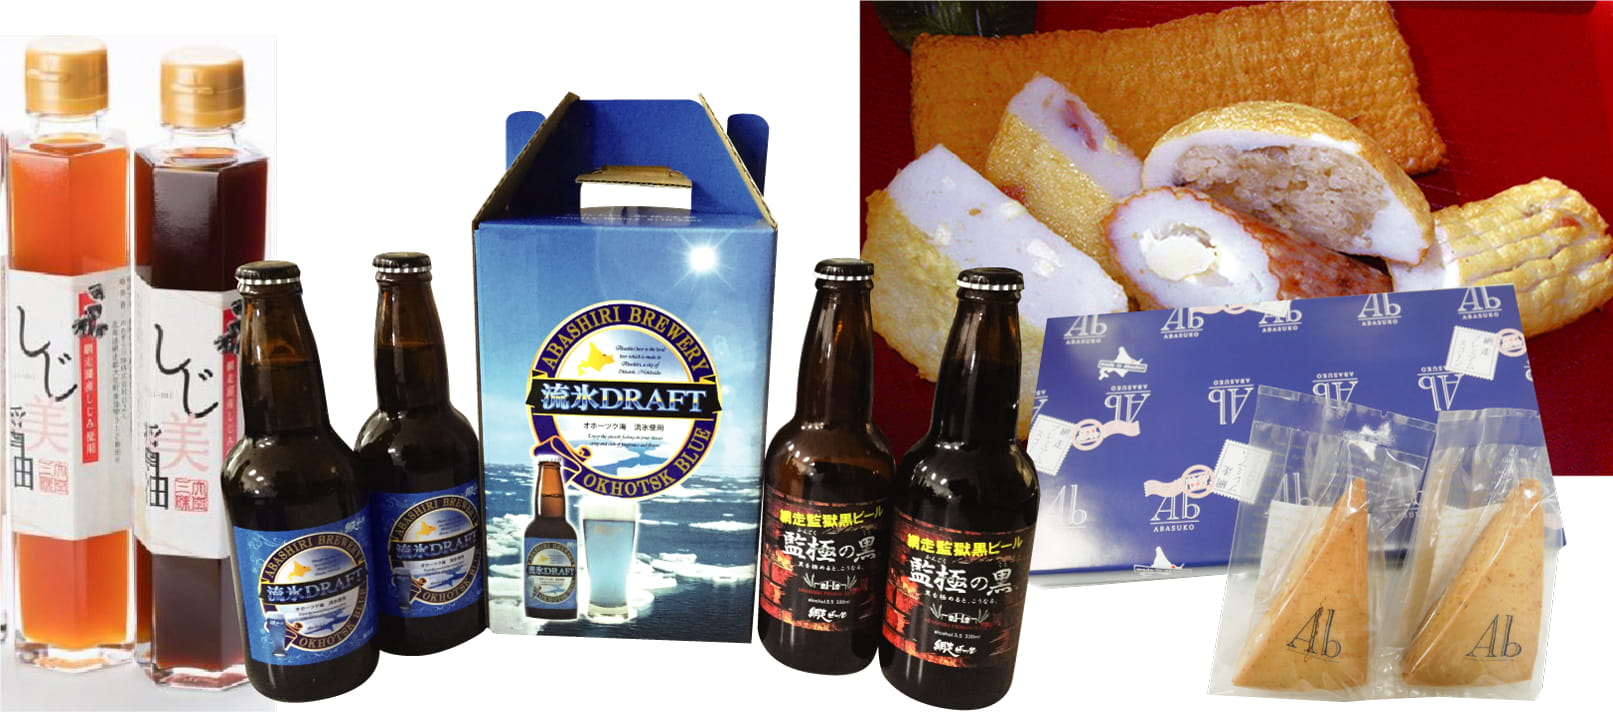 Win special products of Abashiri!